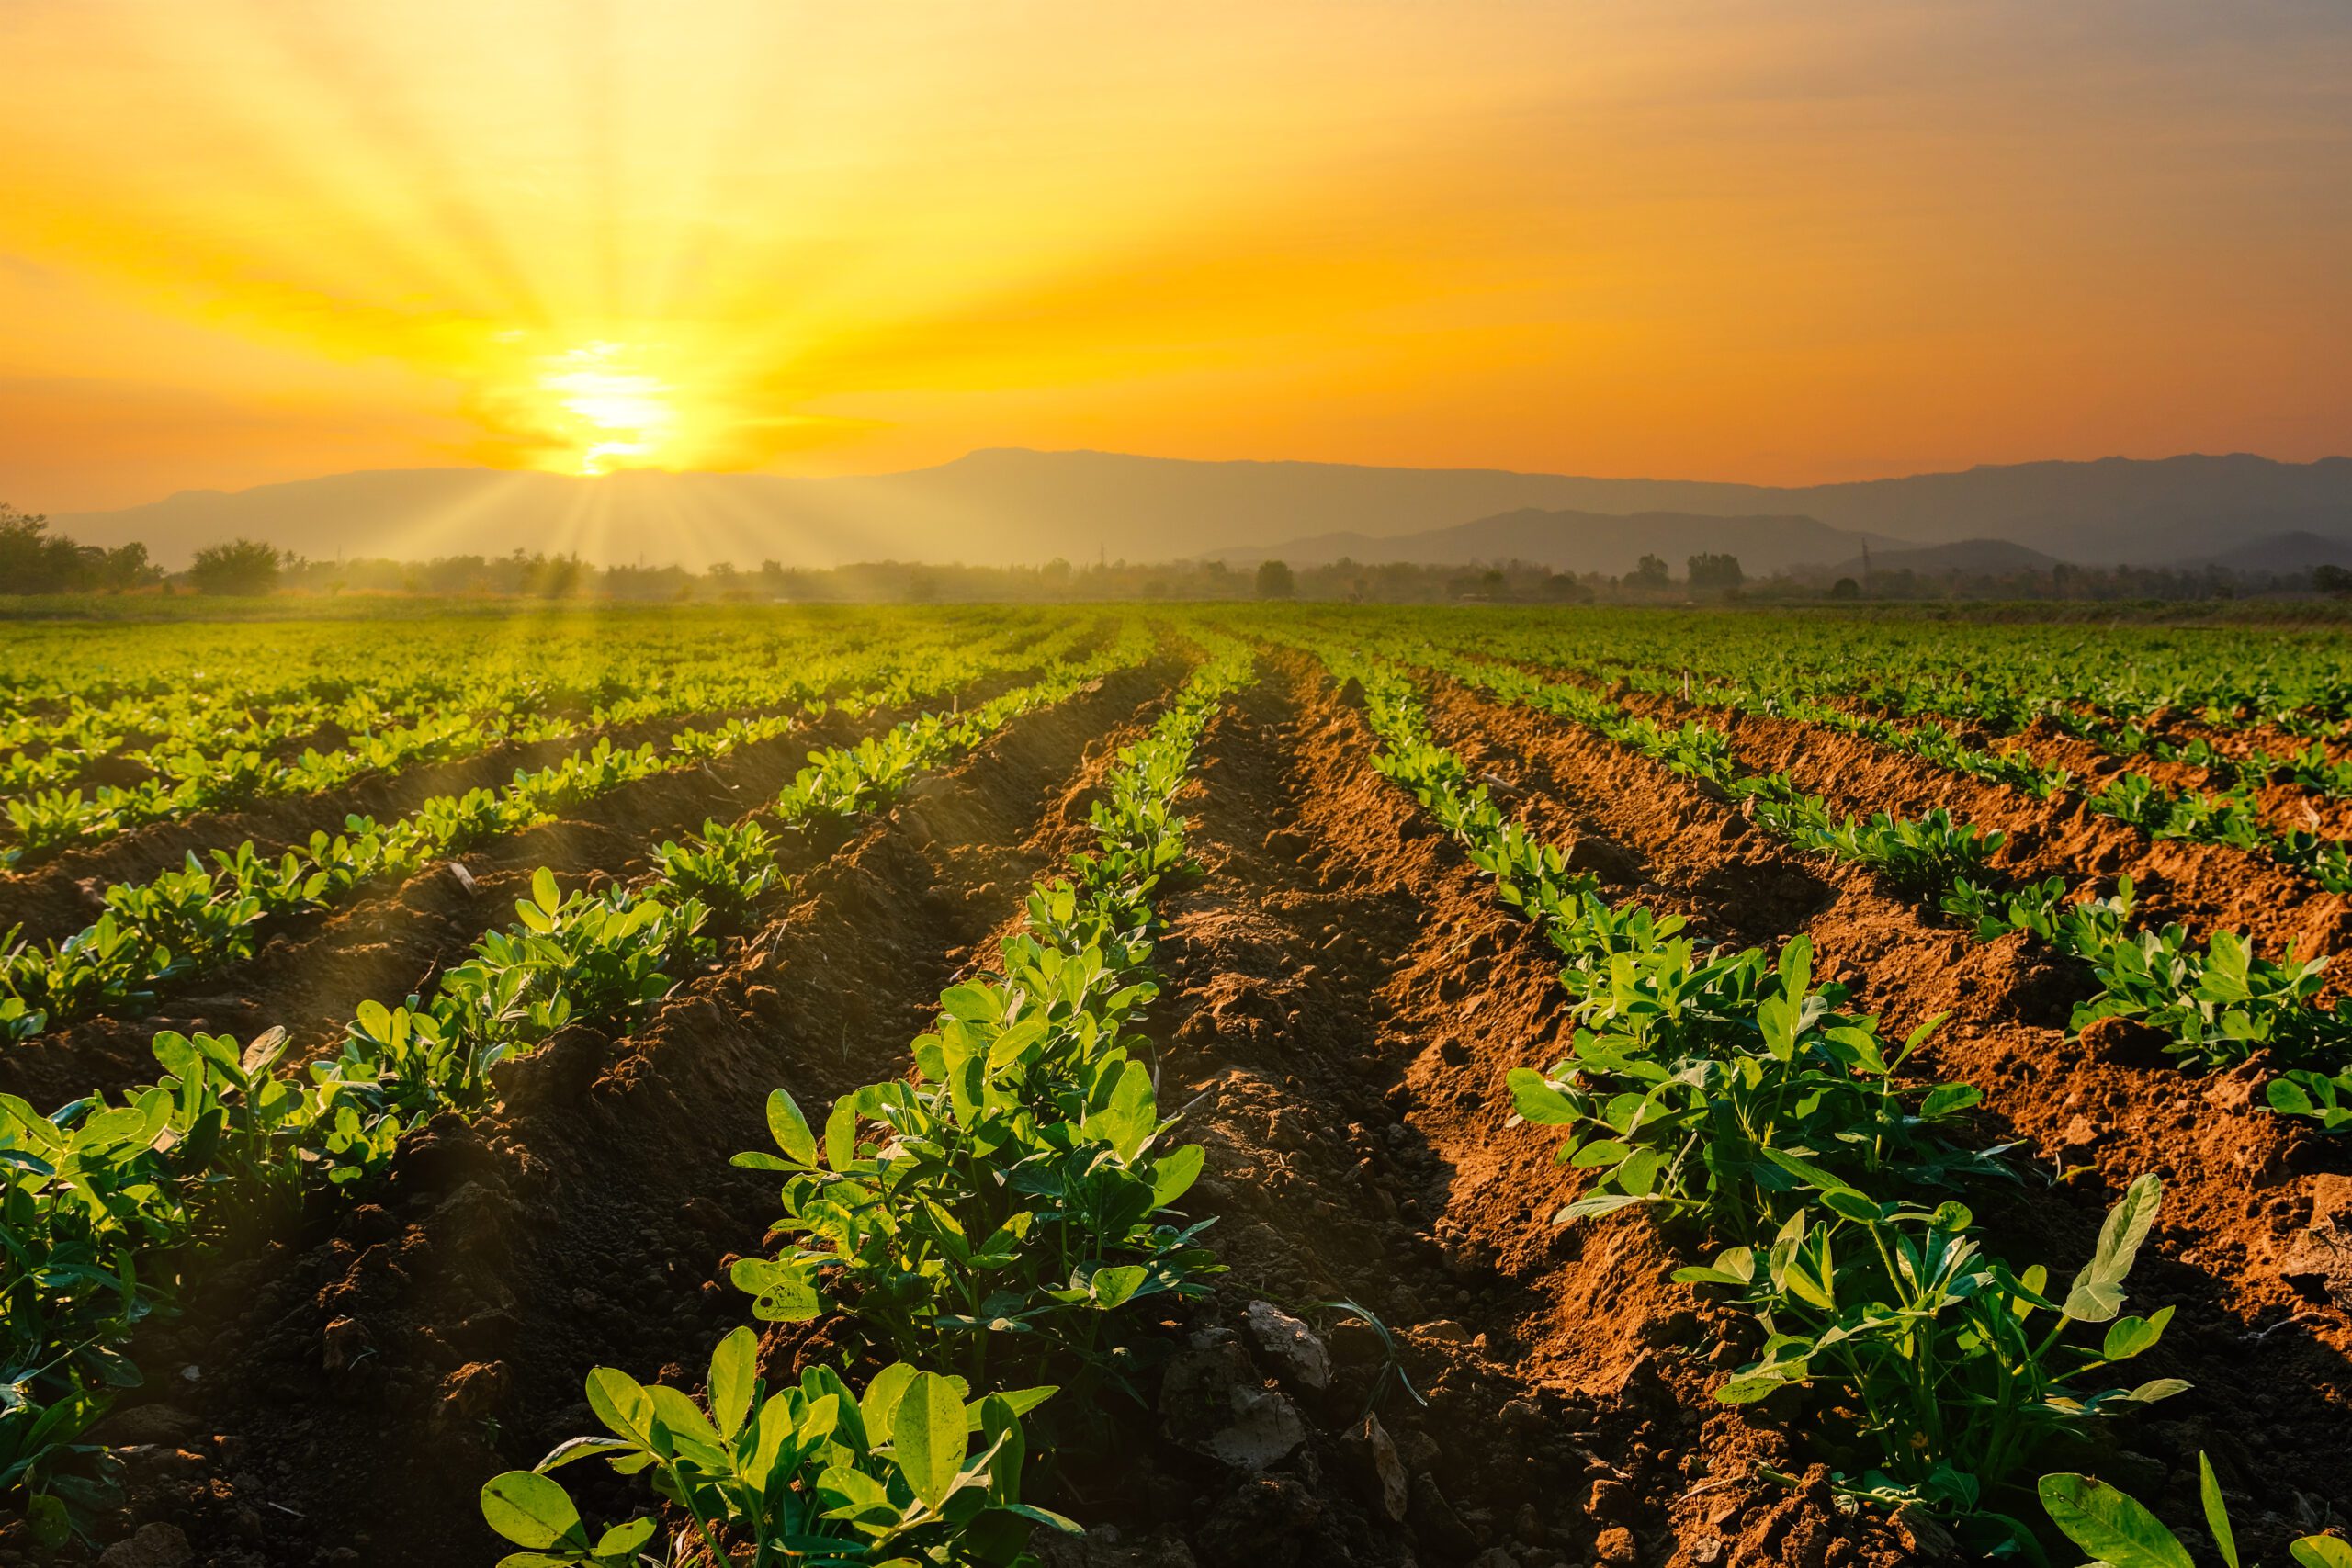 Photo of a field growing crops in front of a sunrise